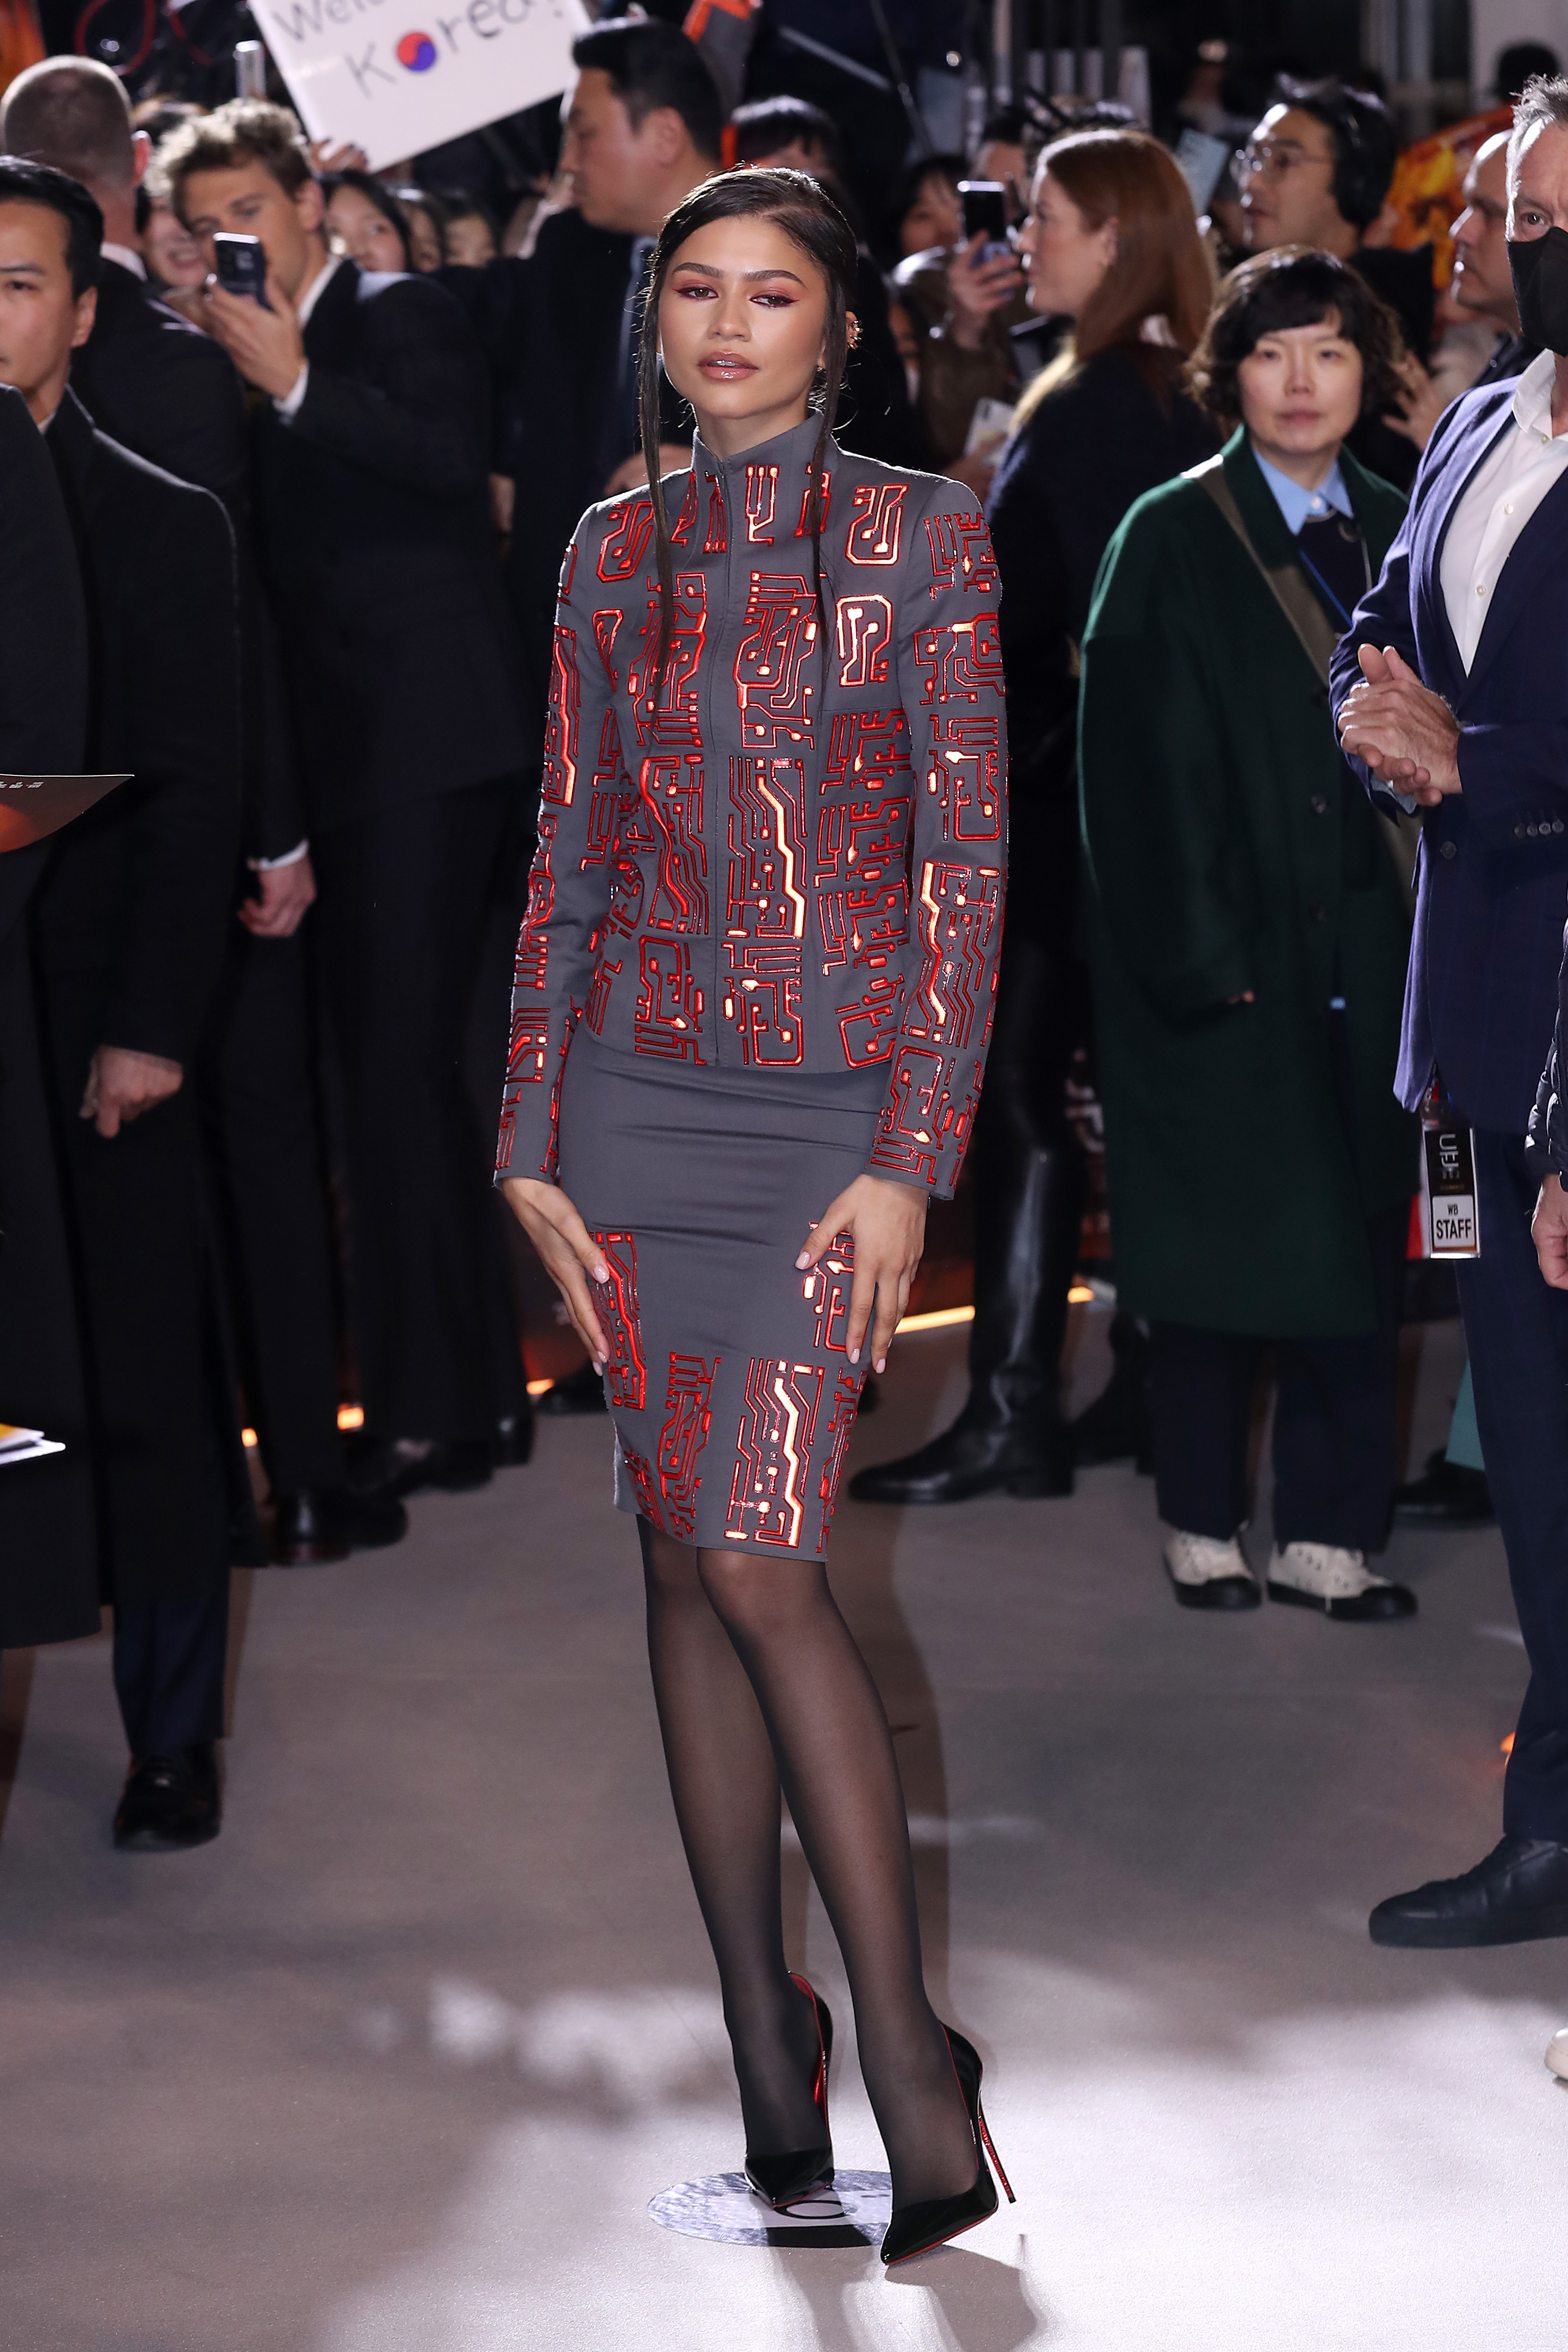 Zendaya poses in a long-sleeved grey top and matching pencil skirt that's covered in red sequins that look like computer coding